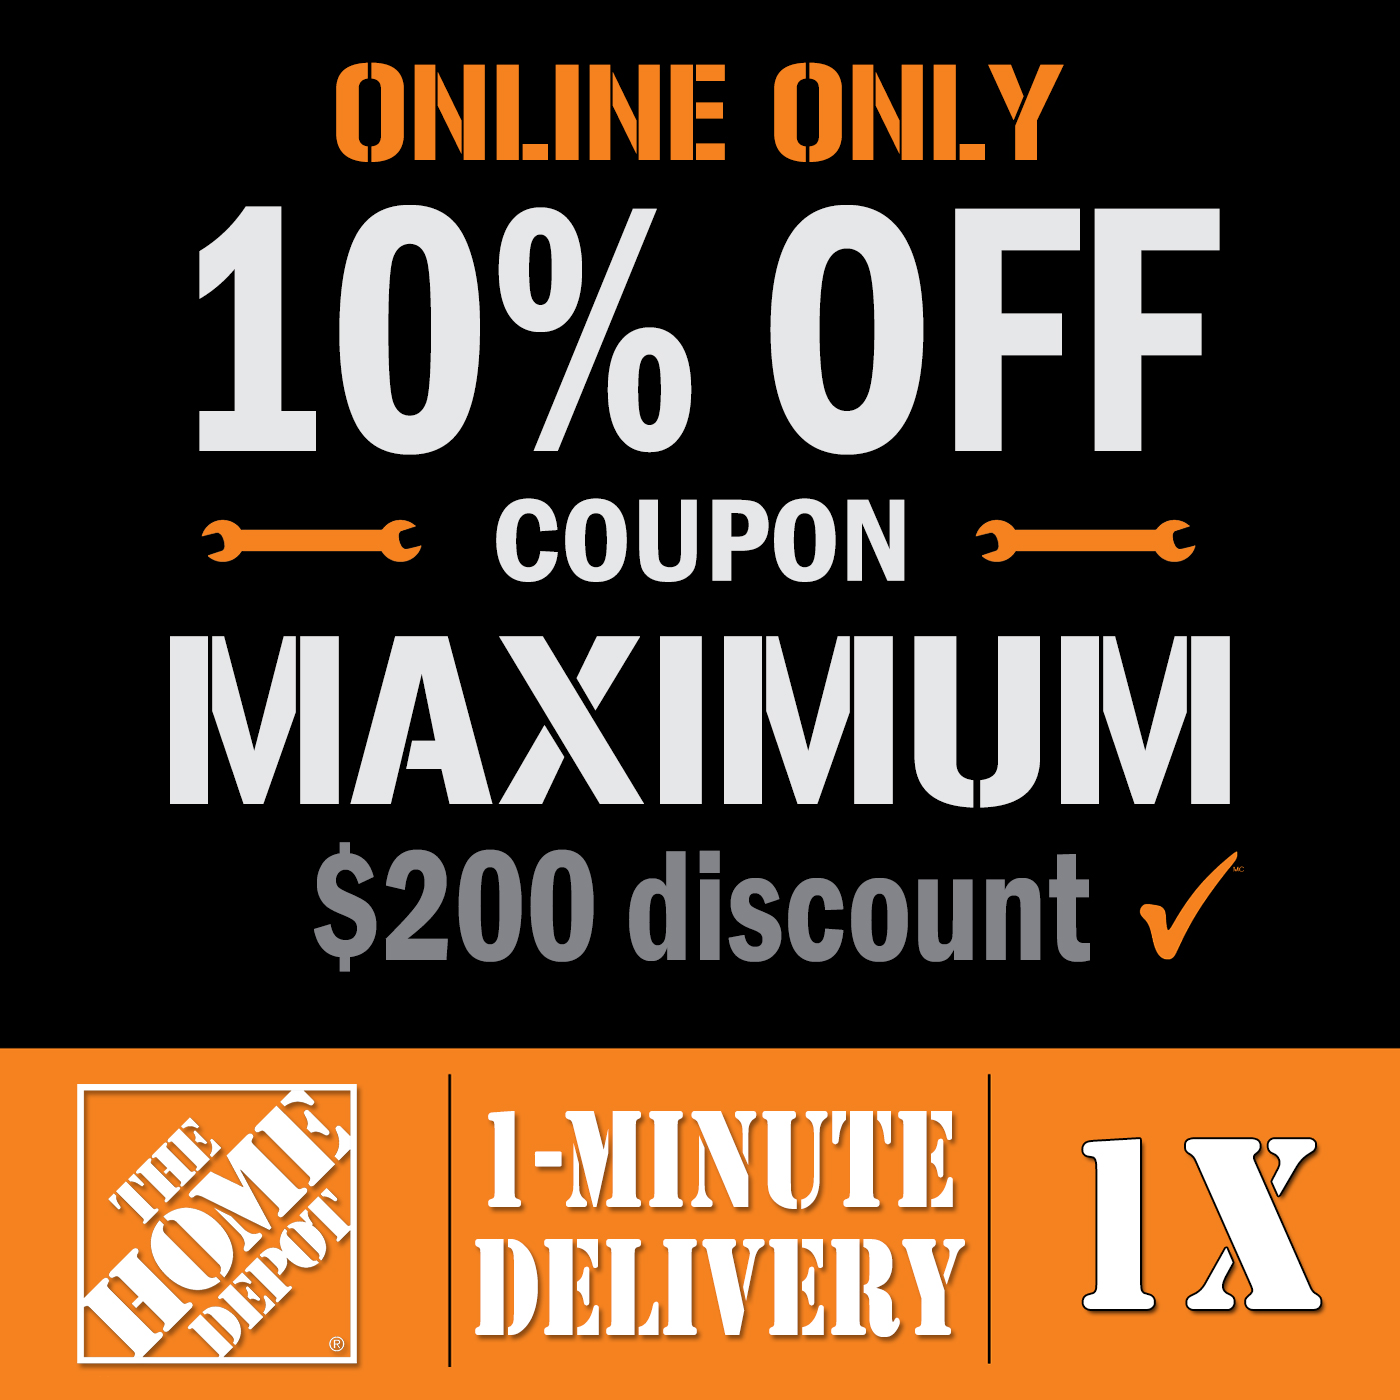 Home Depot Coupon Save 10 off online orders. Instant Email Delivery